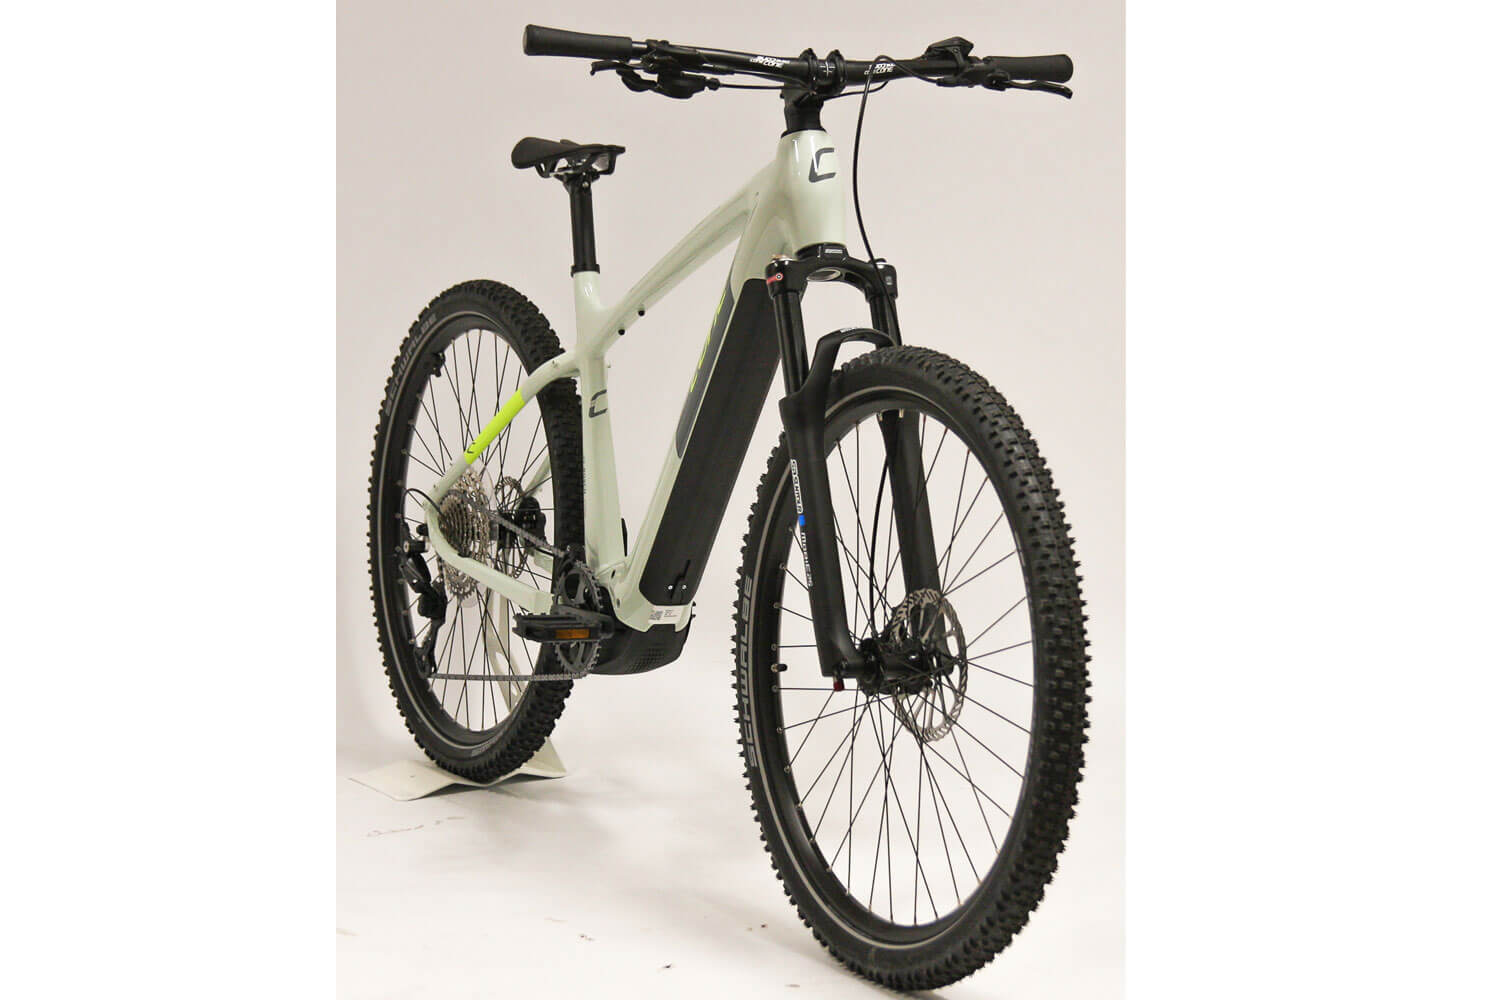 CONE eTrail IN 3.0 Gent 750Wh Grey-Black / Yellow